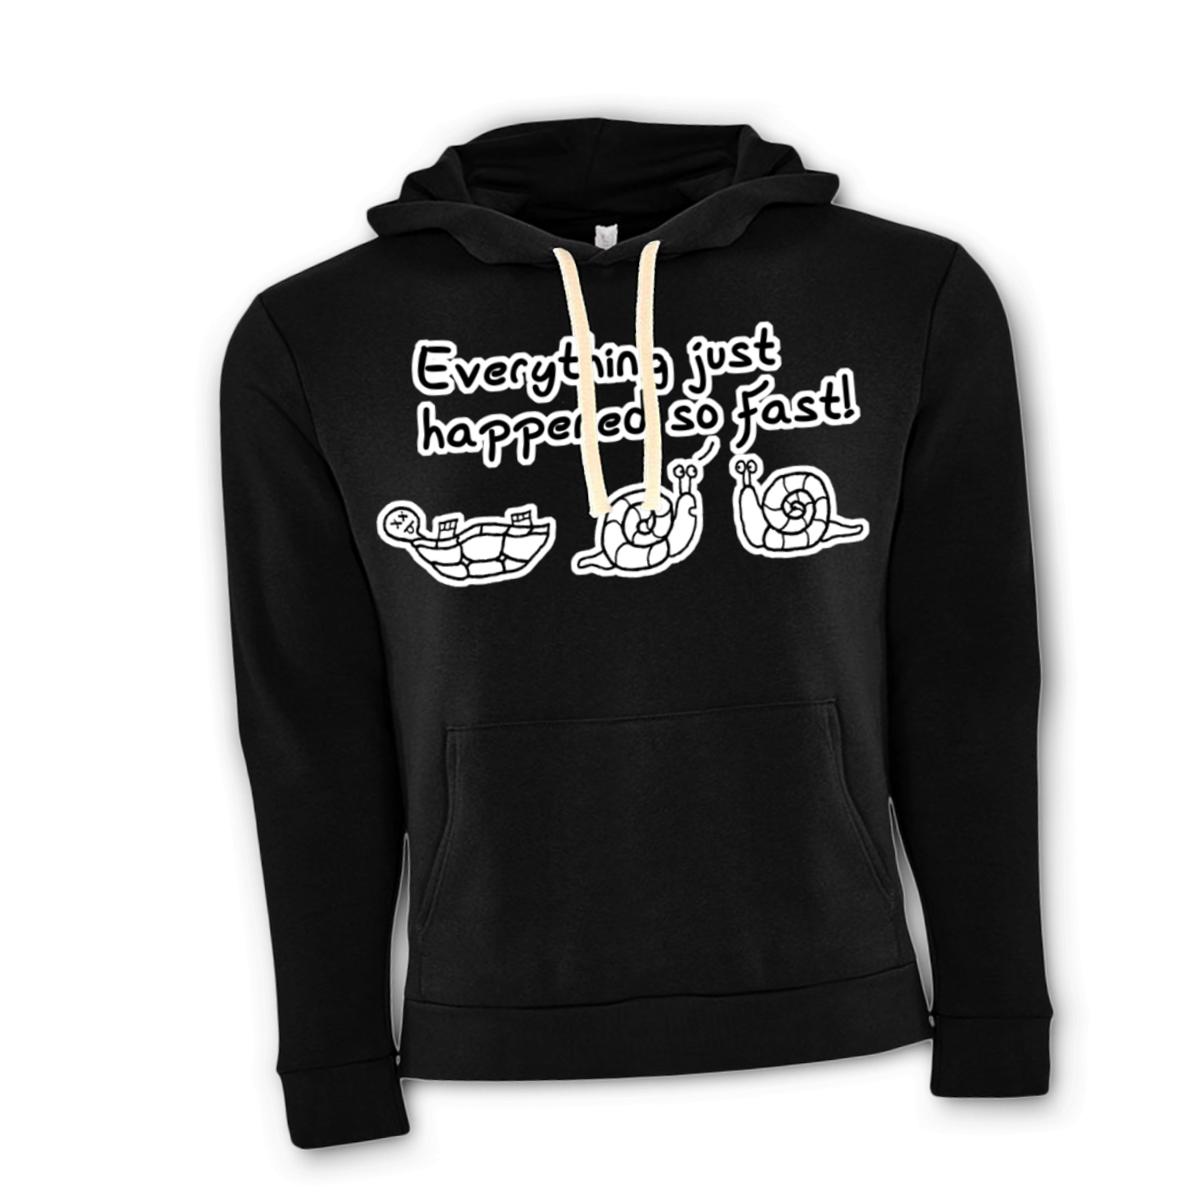 Happened So Fast Unisex Pullover Hoodie Small black